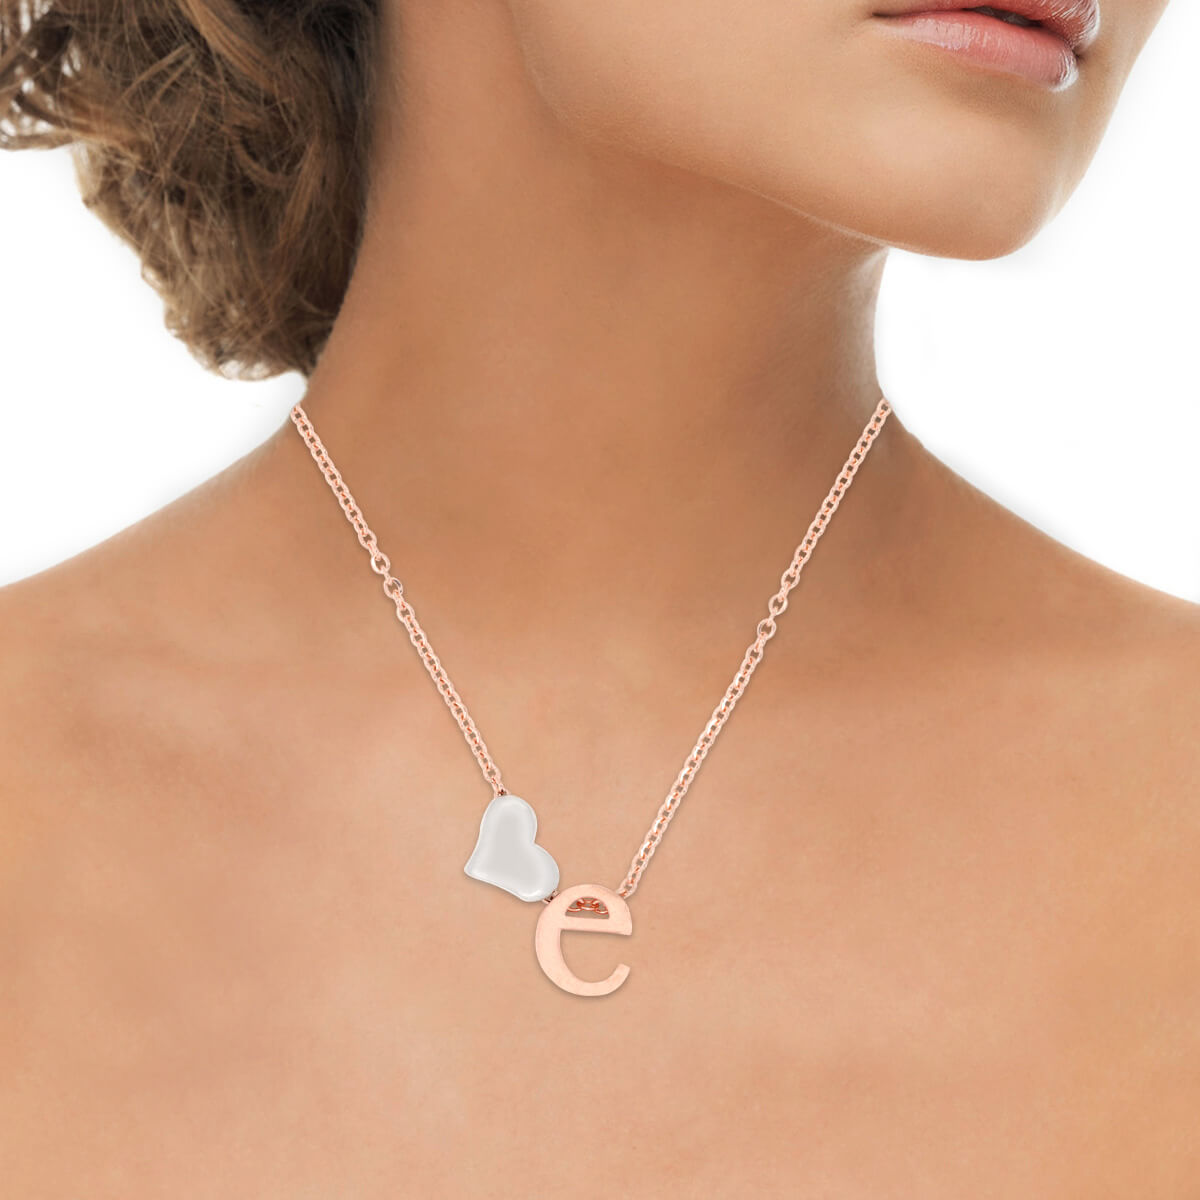 Sterling Silver "E" Initial Necklace